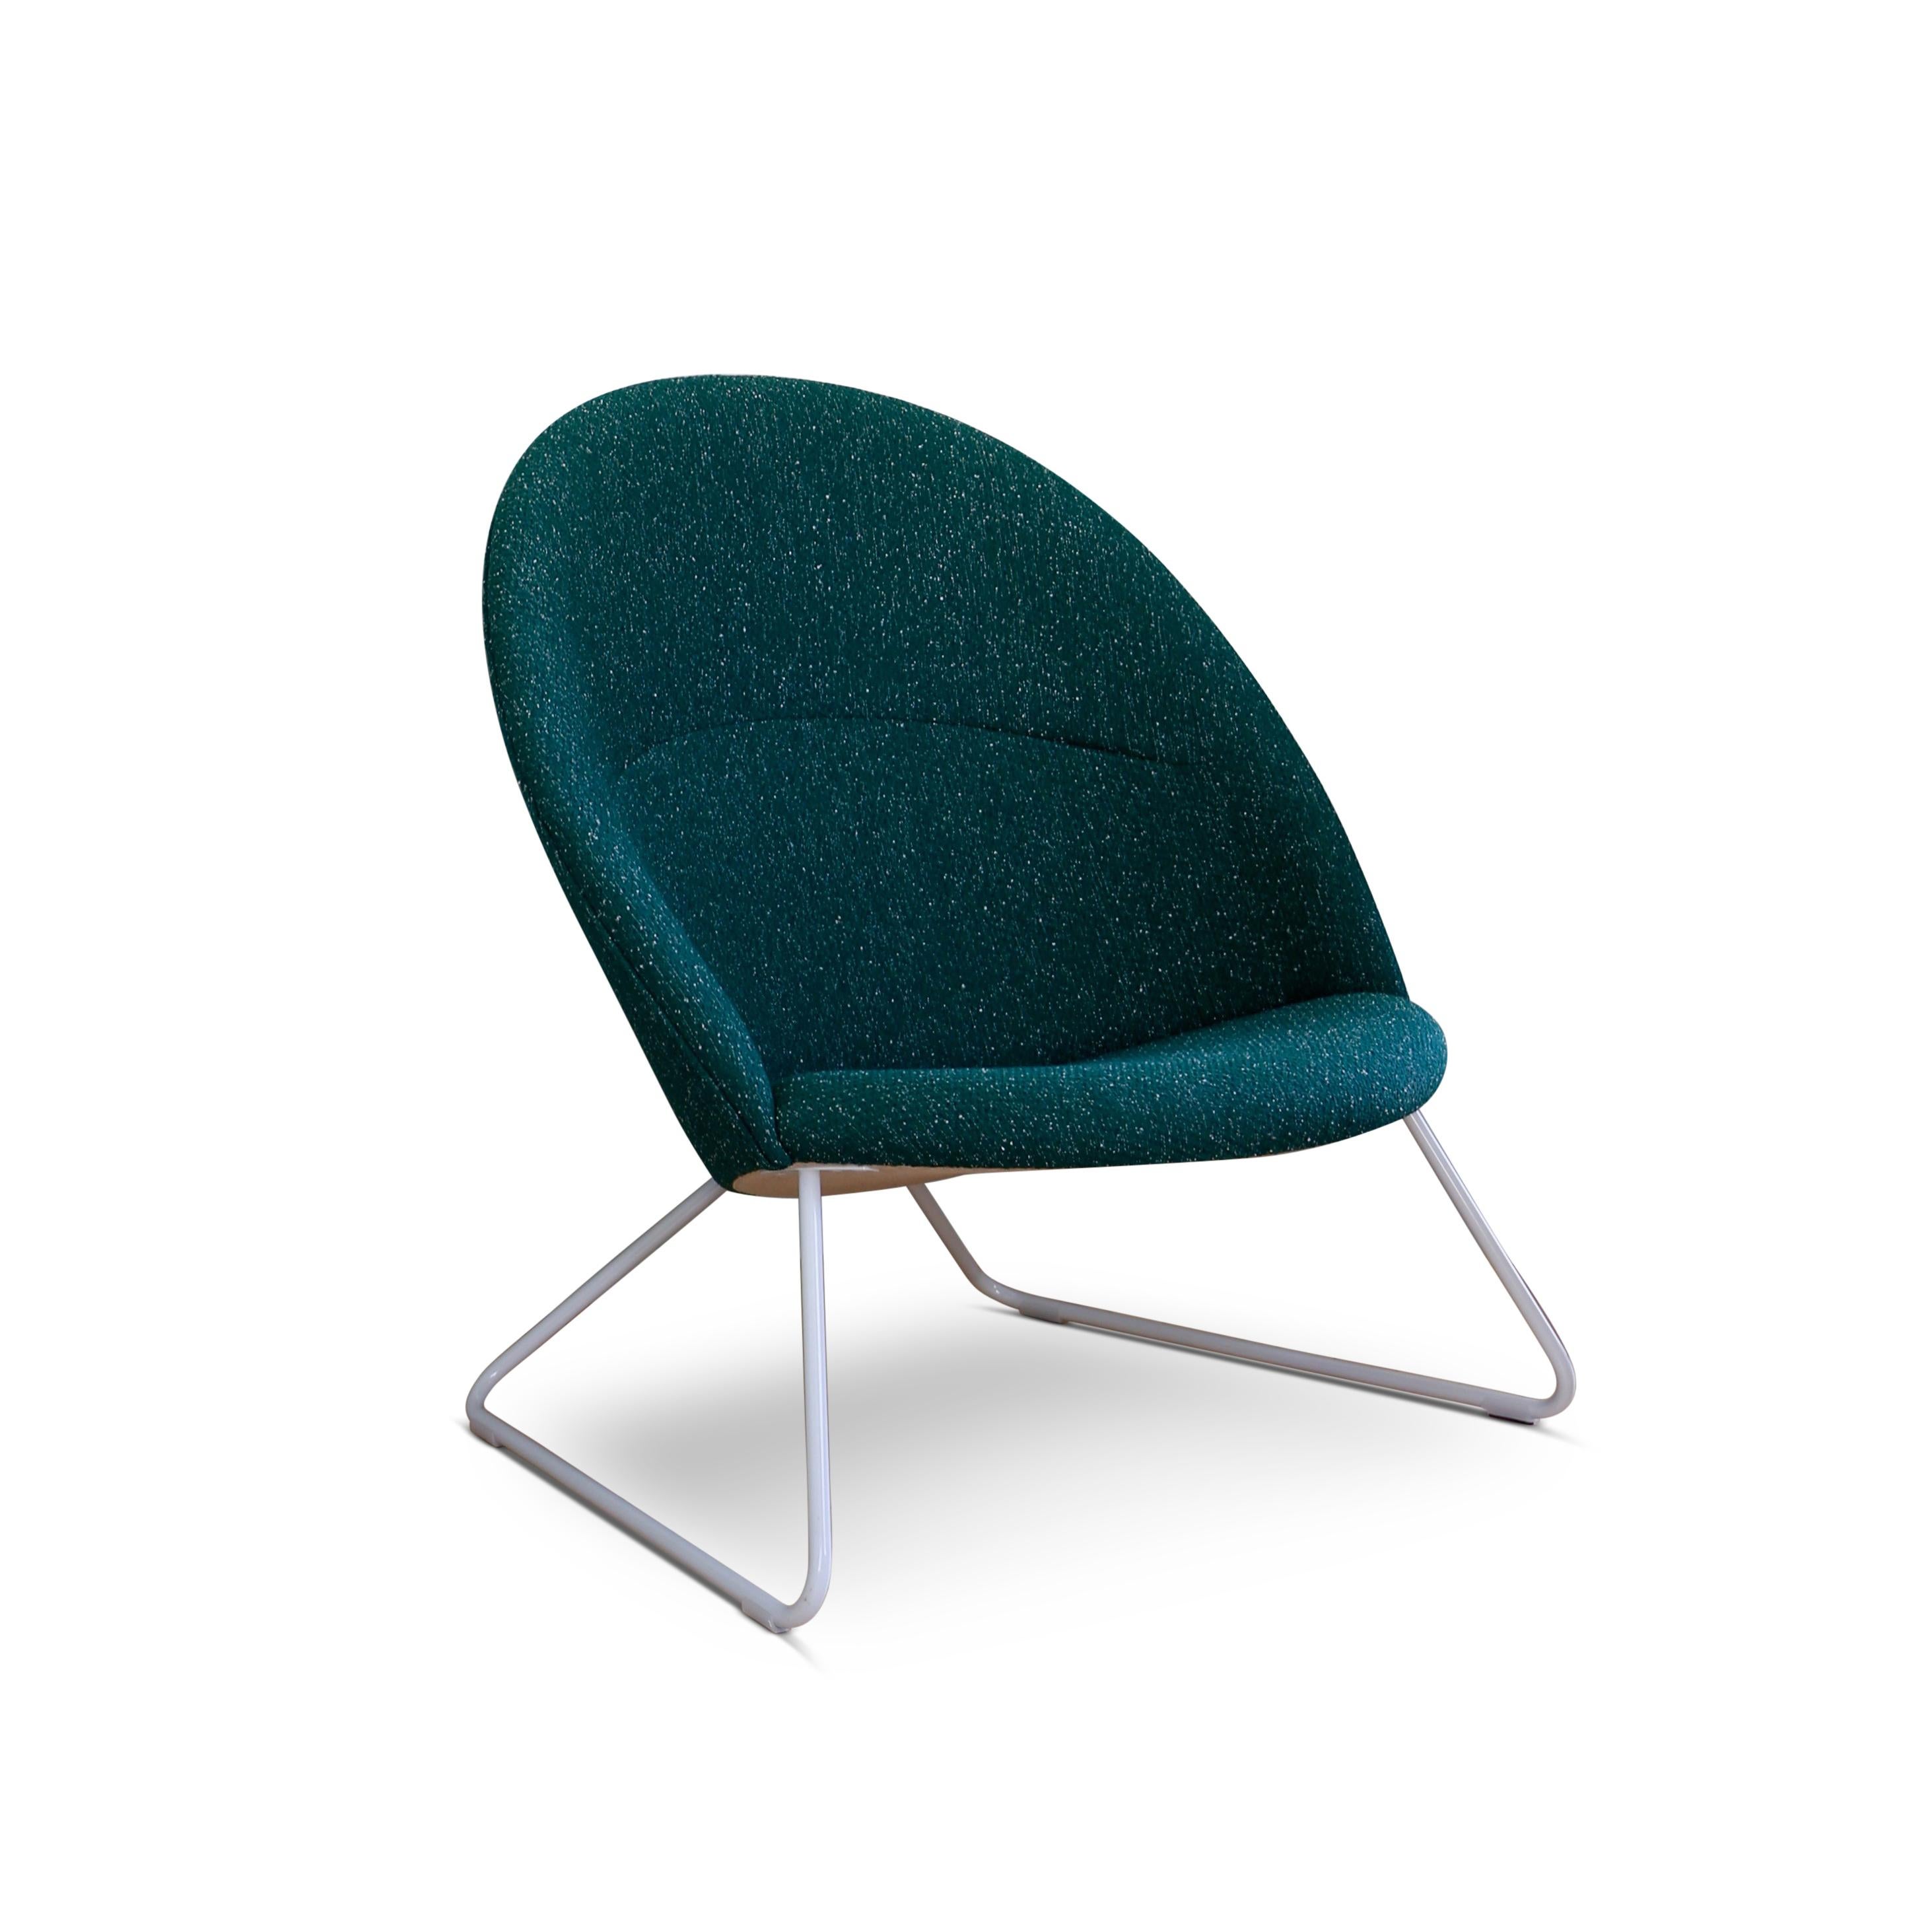 Nanna Ditzel & Jørgen Ditzel, Green Dennie Chair by One Collection In New Condition For Sale In Barcelona, Barcelona